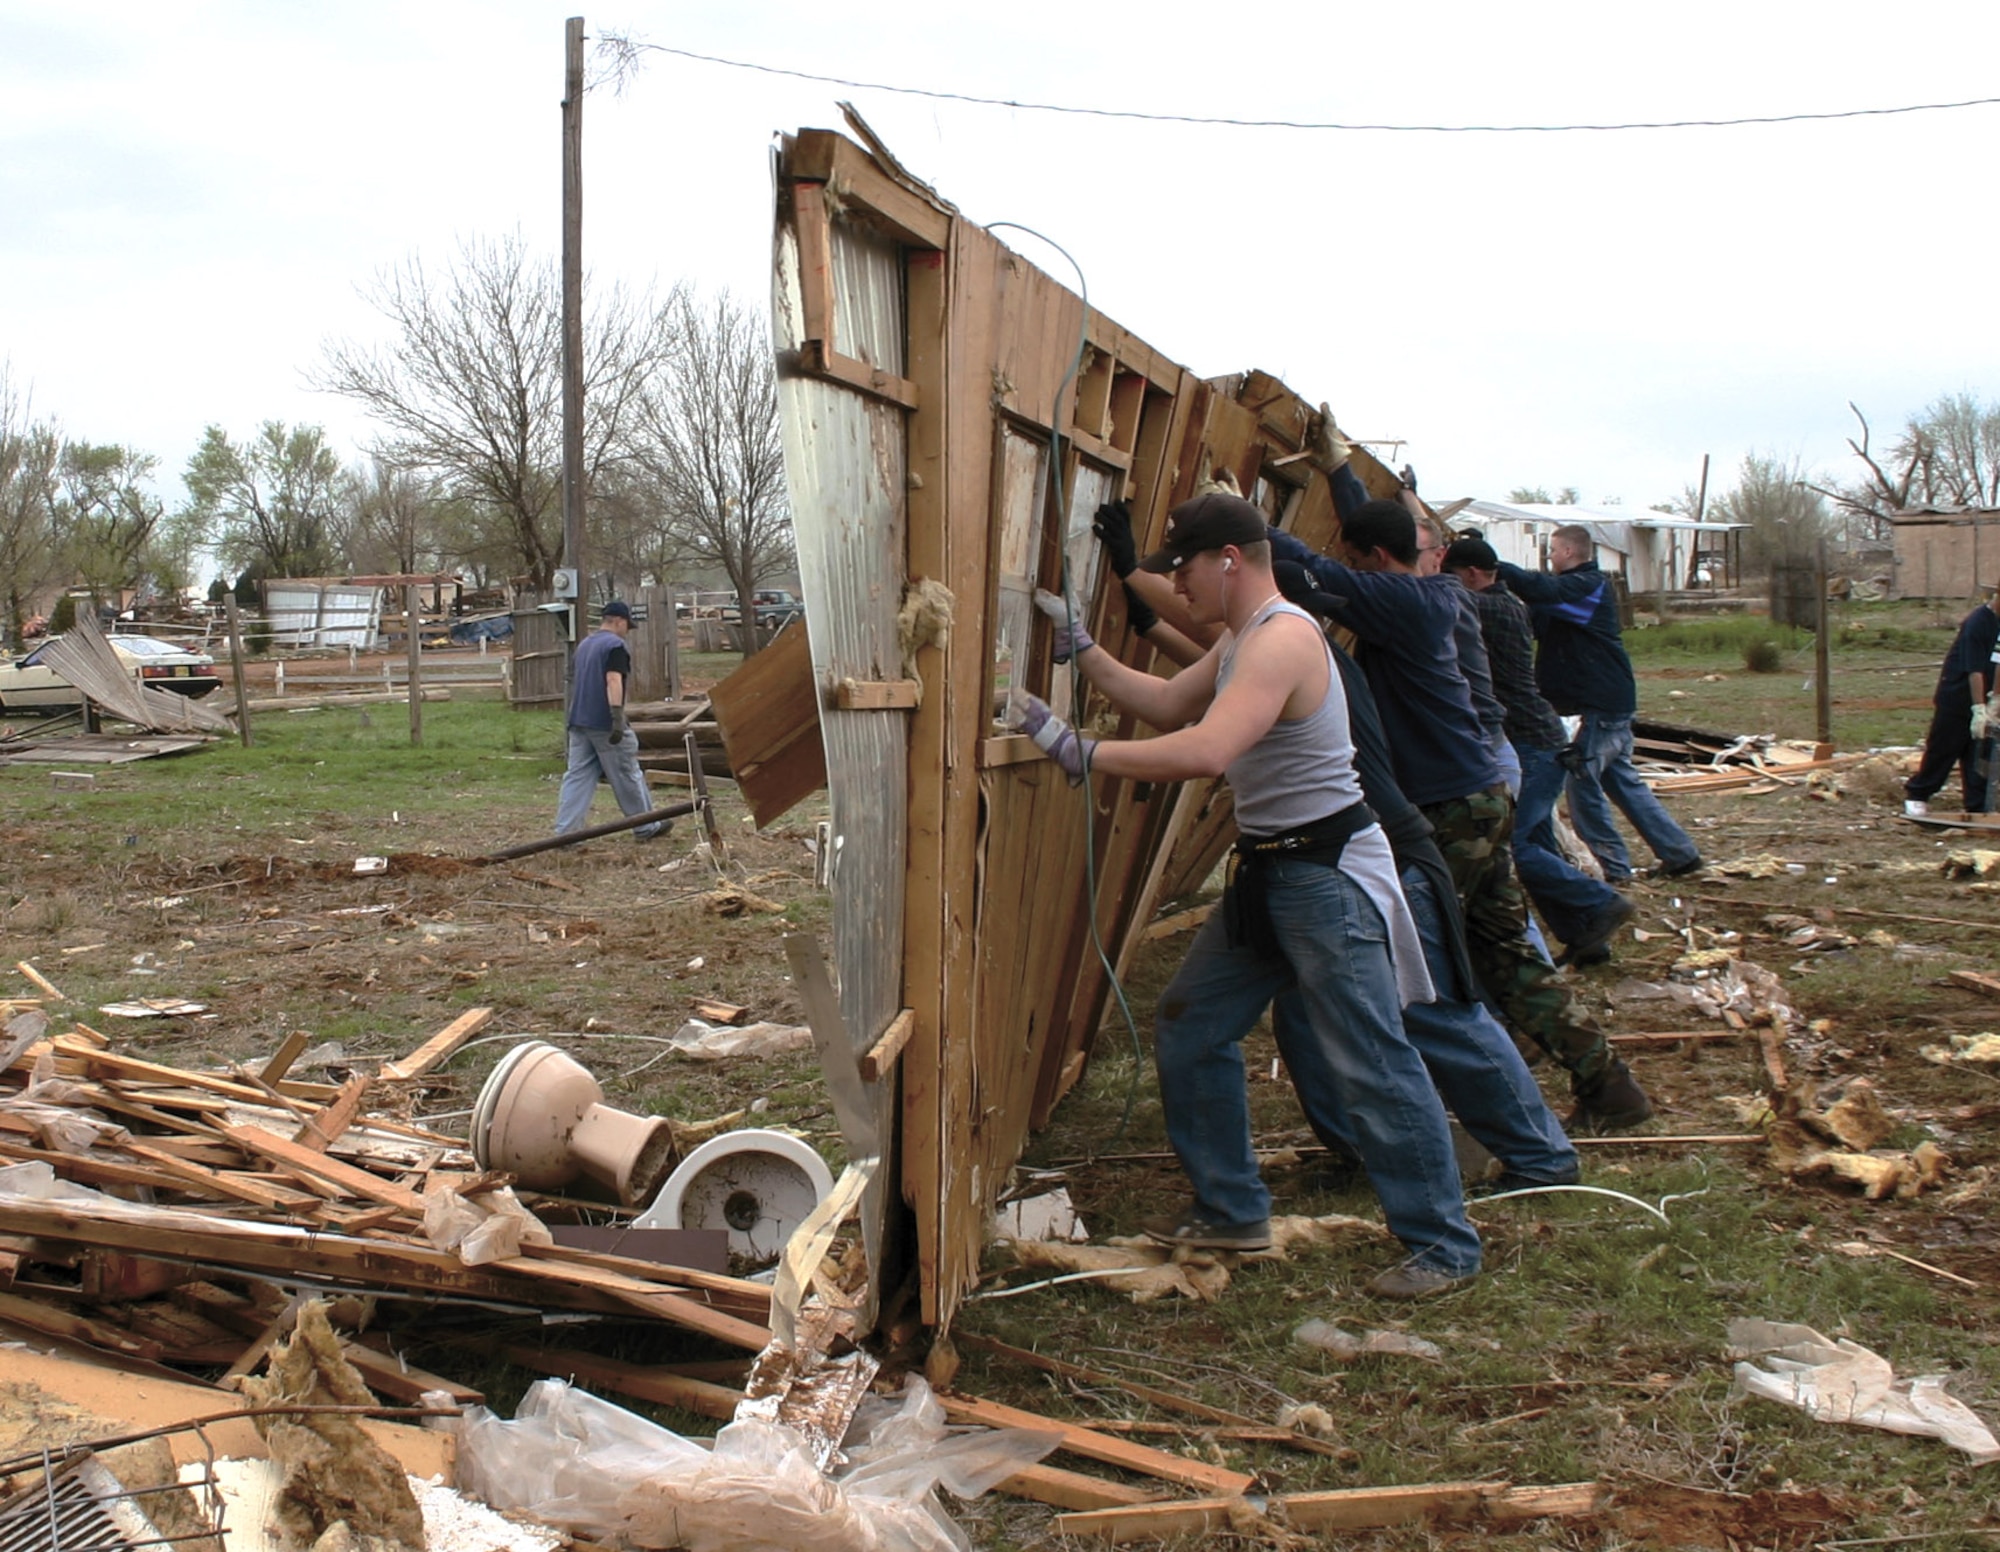 More than 500 Airmen from Cannon Air Force Base have assisted Clovis, N.M., residents in storm clean up. A tornado hit the town, located six miles east of the base, March 23 leaving homes, property and businesses in ruin. Airmen will continue to assist in clean up efforts on an individual basis through the "Airmen for an Afternoon" program. (U.S. Air Force photo/Airman 1st Class Thomas Trower) 